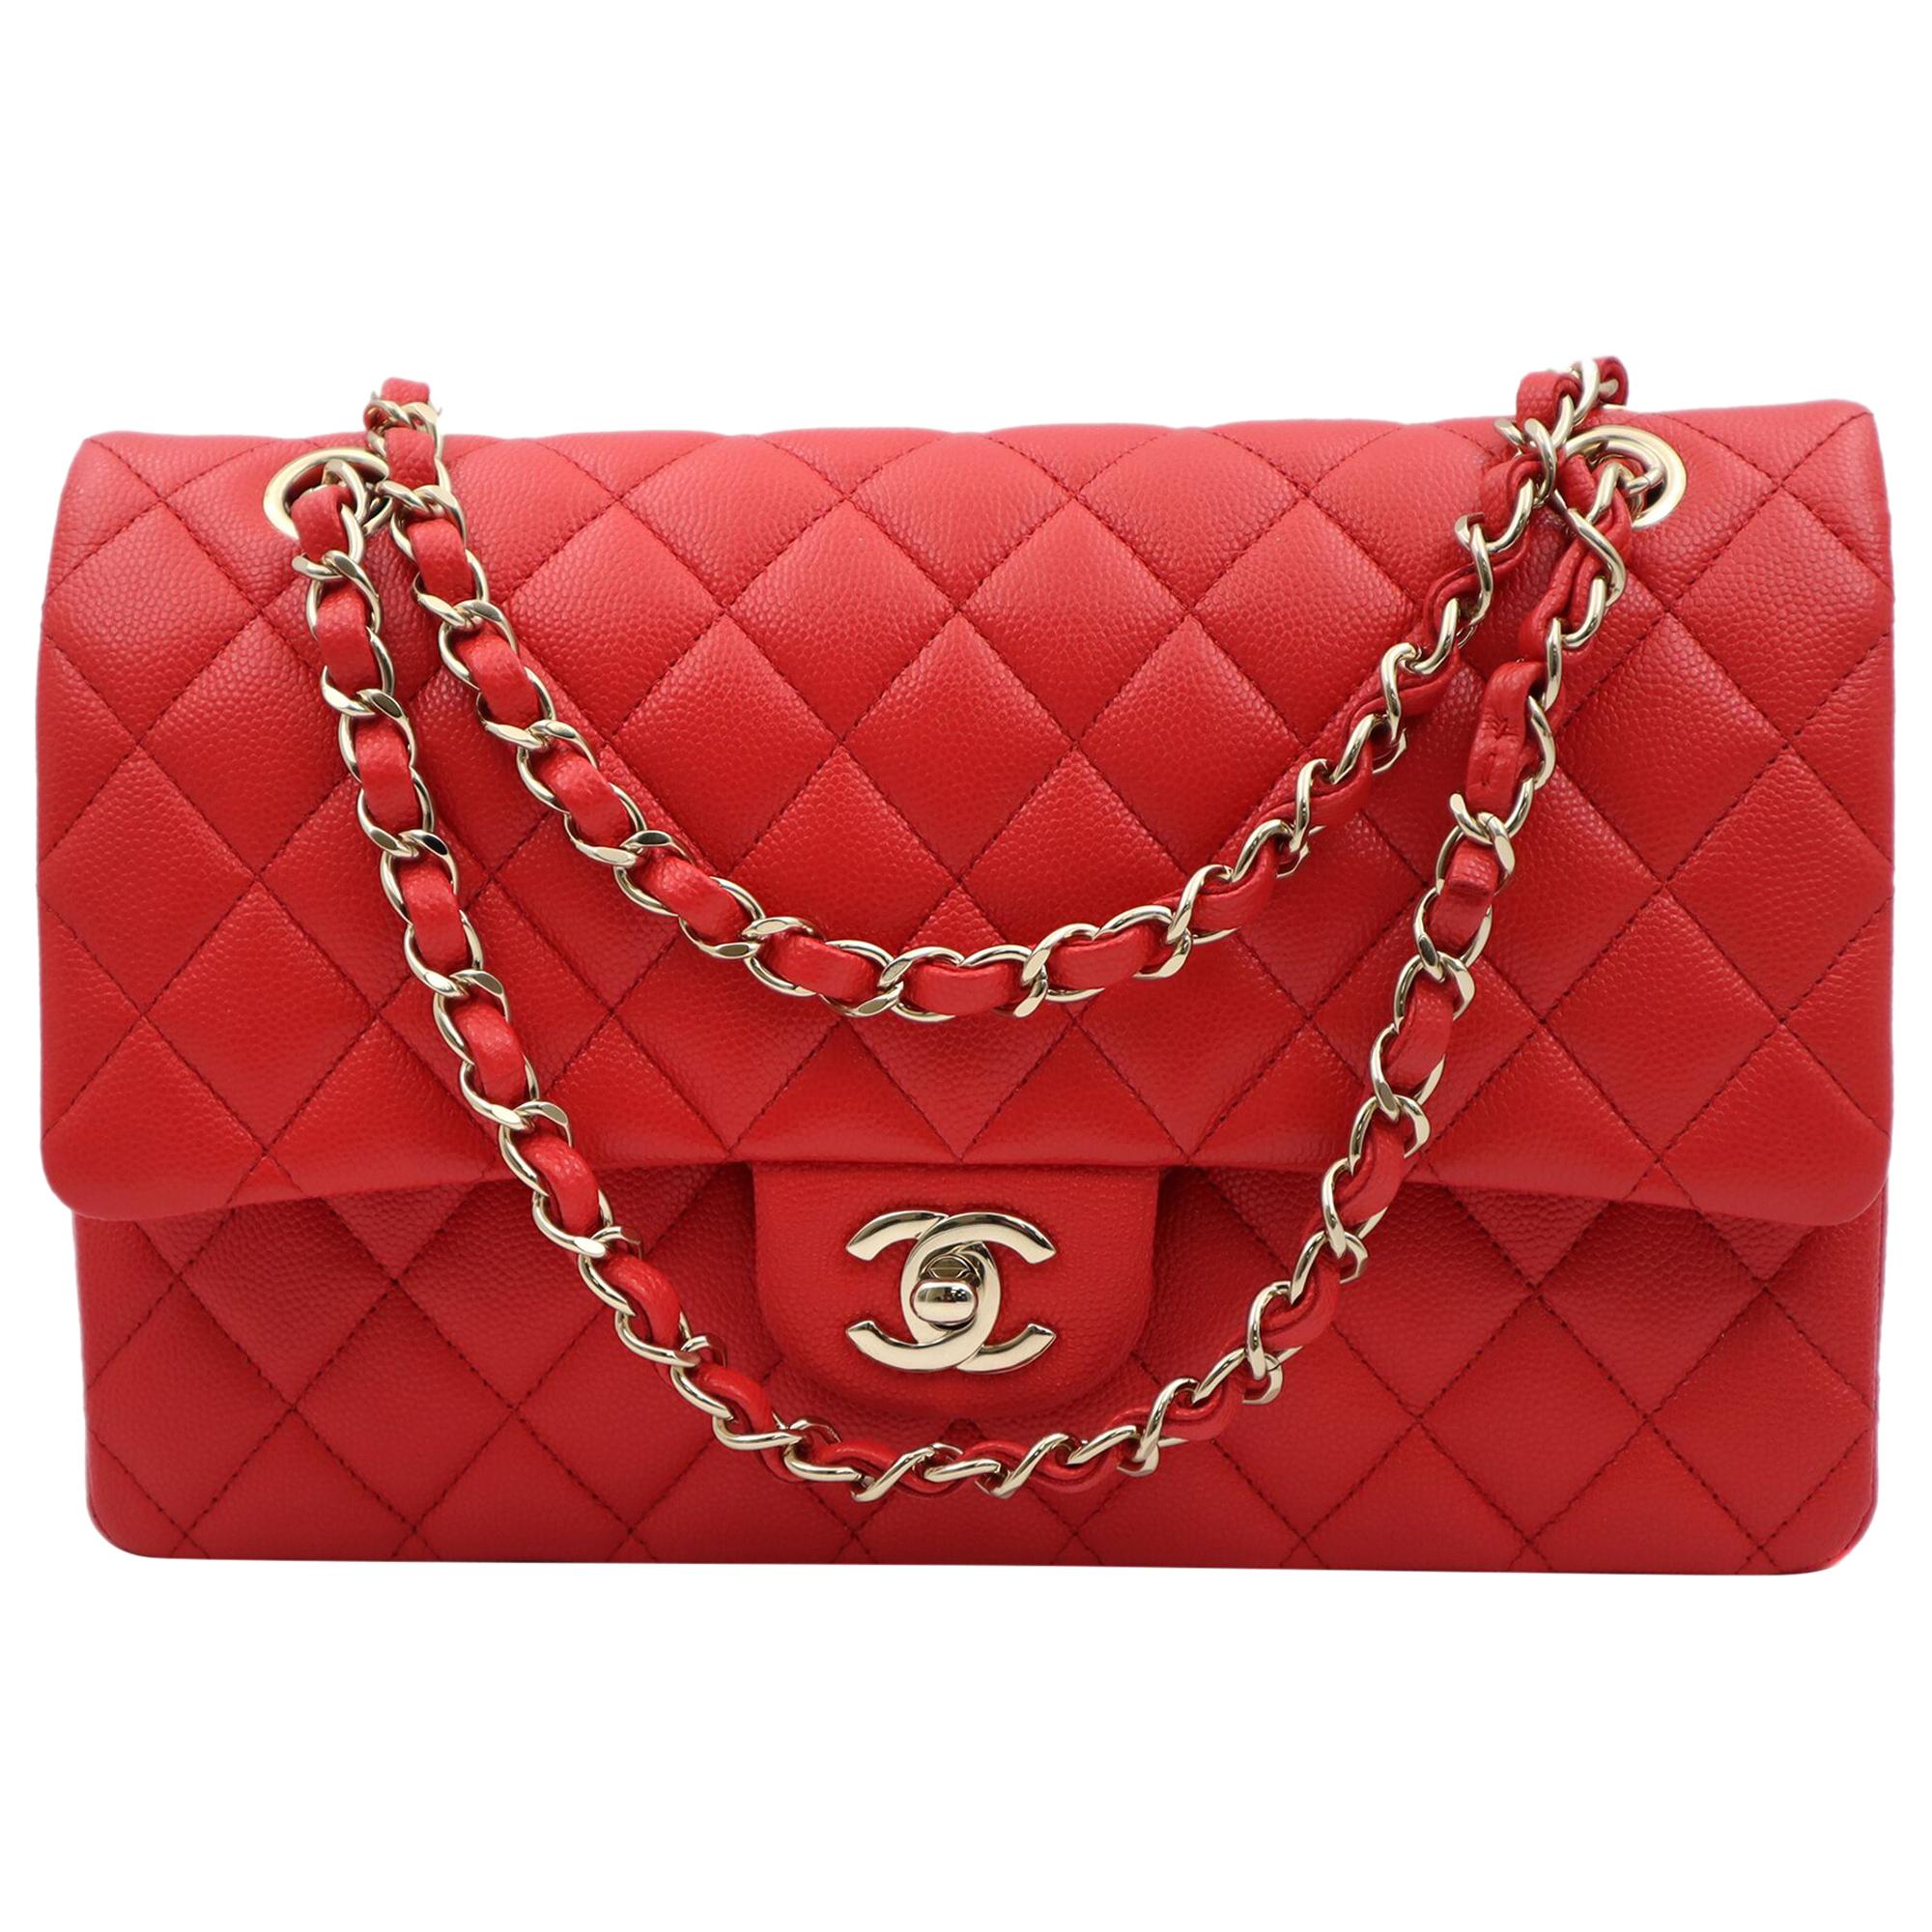 Chanel Classic Coral Red Quilted Caviar Gold Hardware Medium Flap